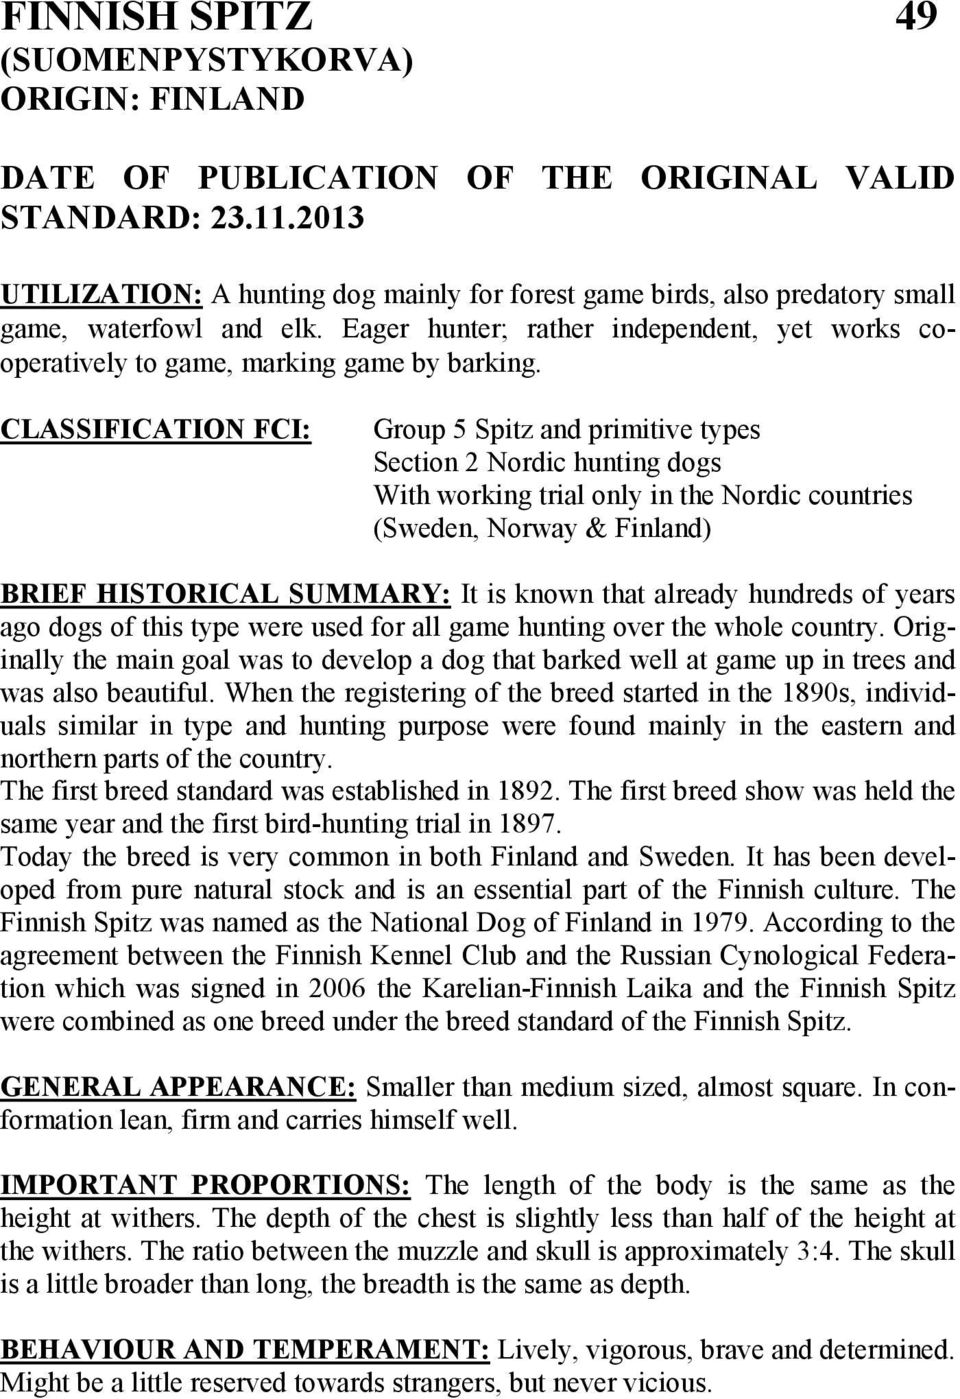 CLASSIFICATION FCI: Group 5 Spitz and primitive types Section 2 Nordic hunting dogs With working trial only in the Nordic countries (Sweden, Norway & Finland) BRIEF HISTORICAL SUMMARY: It is known